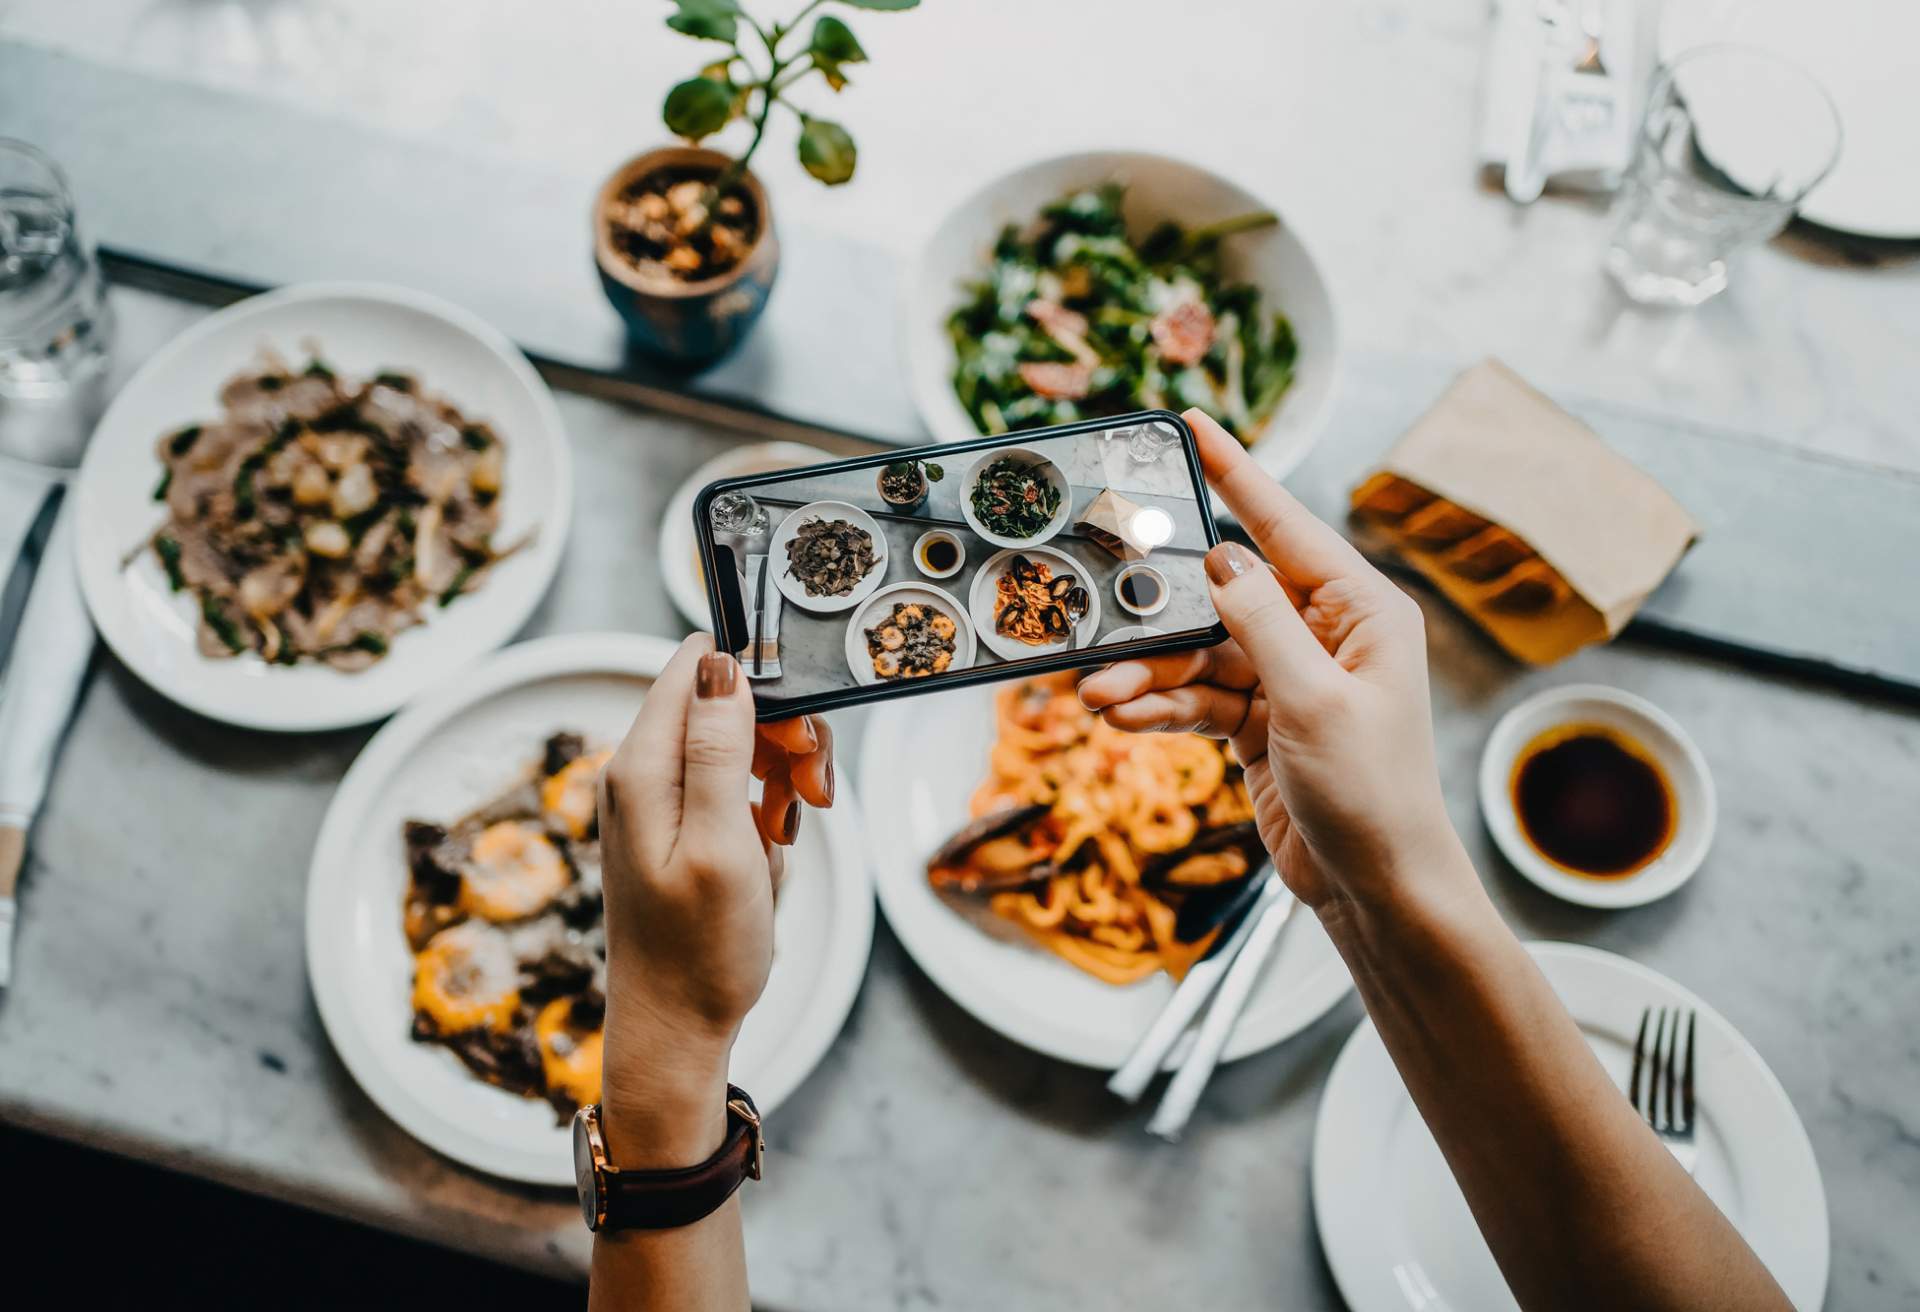 A social media influencer is taking a picture of dishes they've ordered in a restaurant